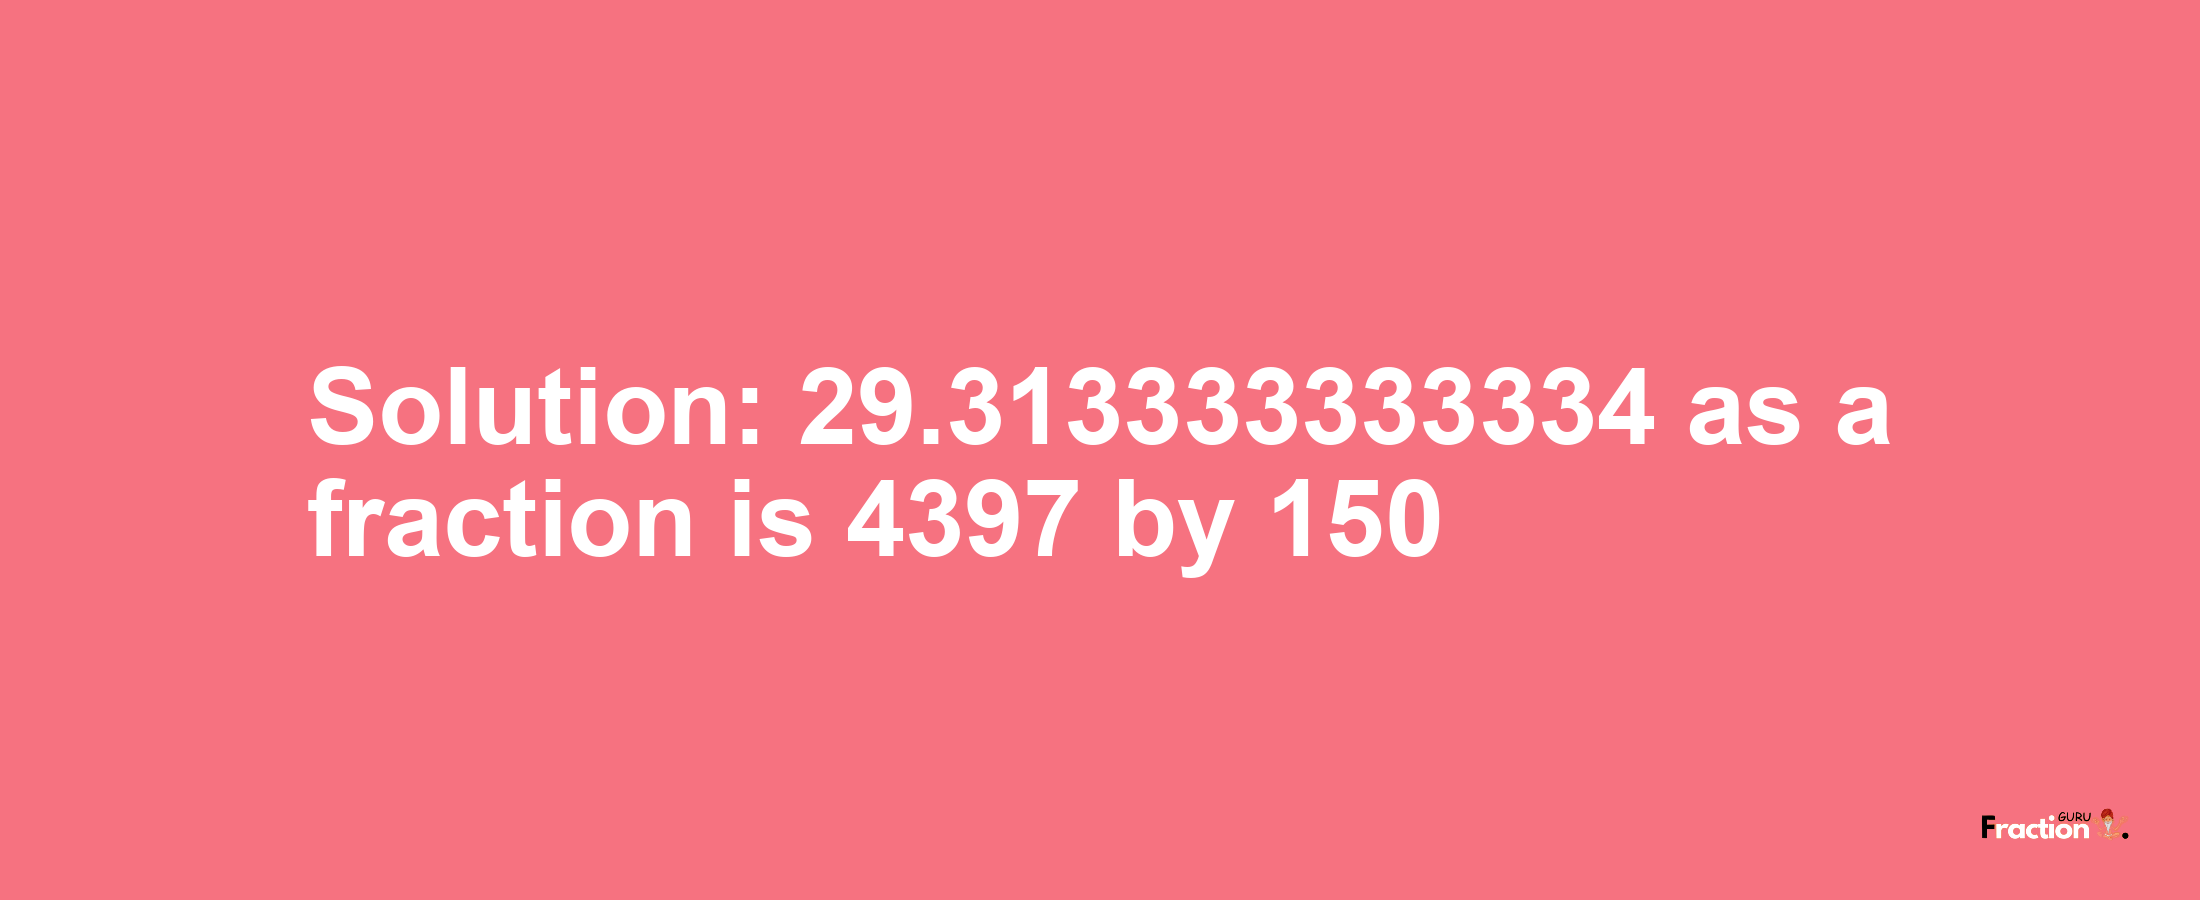 Solution:29.313333333334 as a fraction is 4397/150